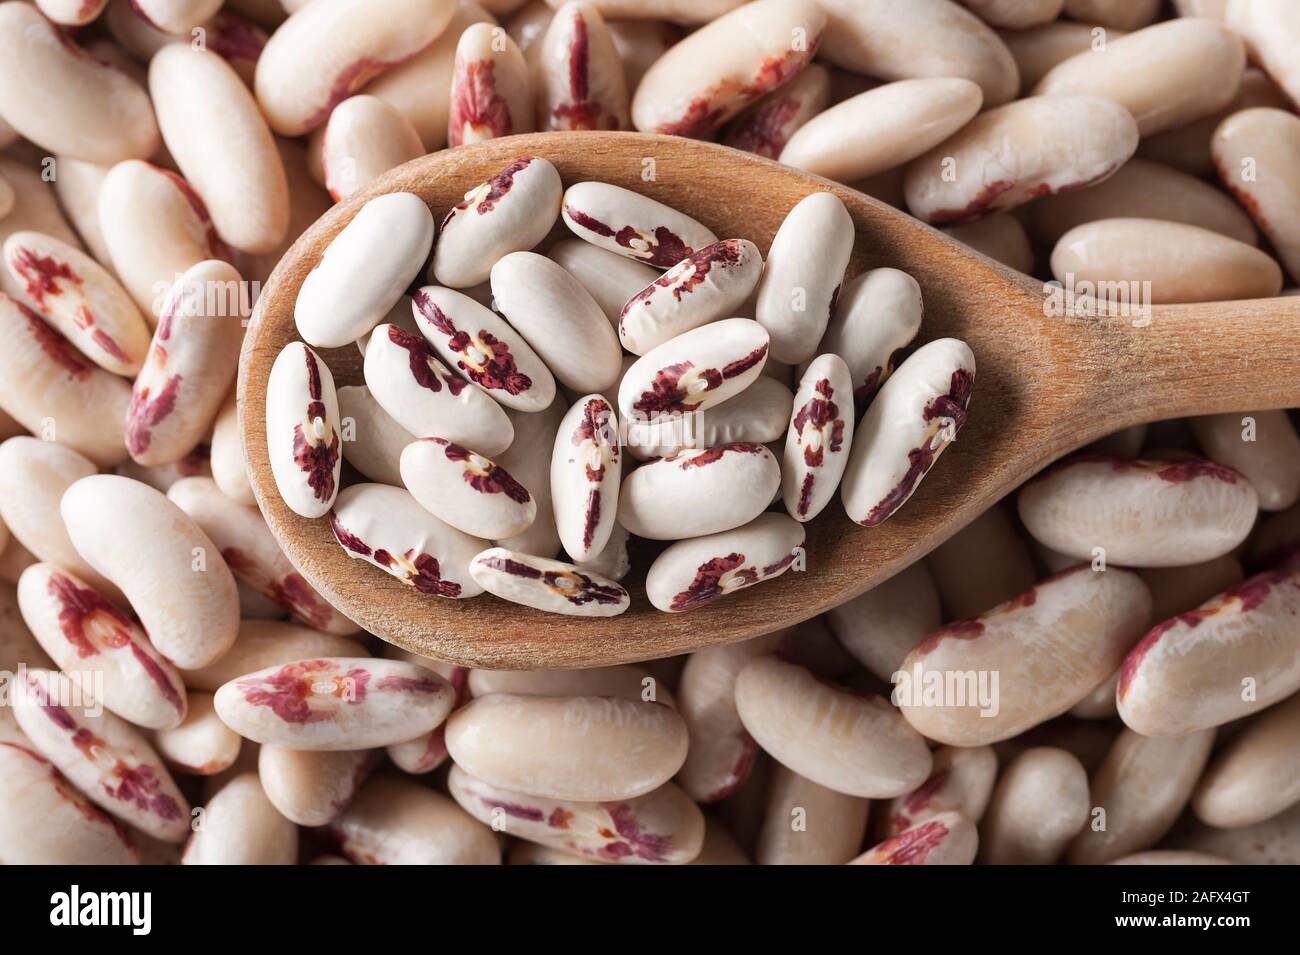 Dry beans in the wooden spoon over soaked beans.Organic beans background..Healthy food concept.Selective focus,horizontal. Stock Photo